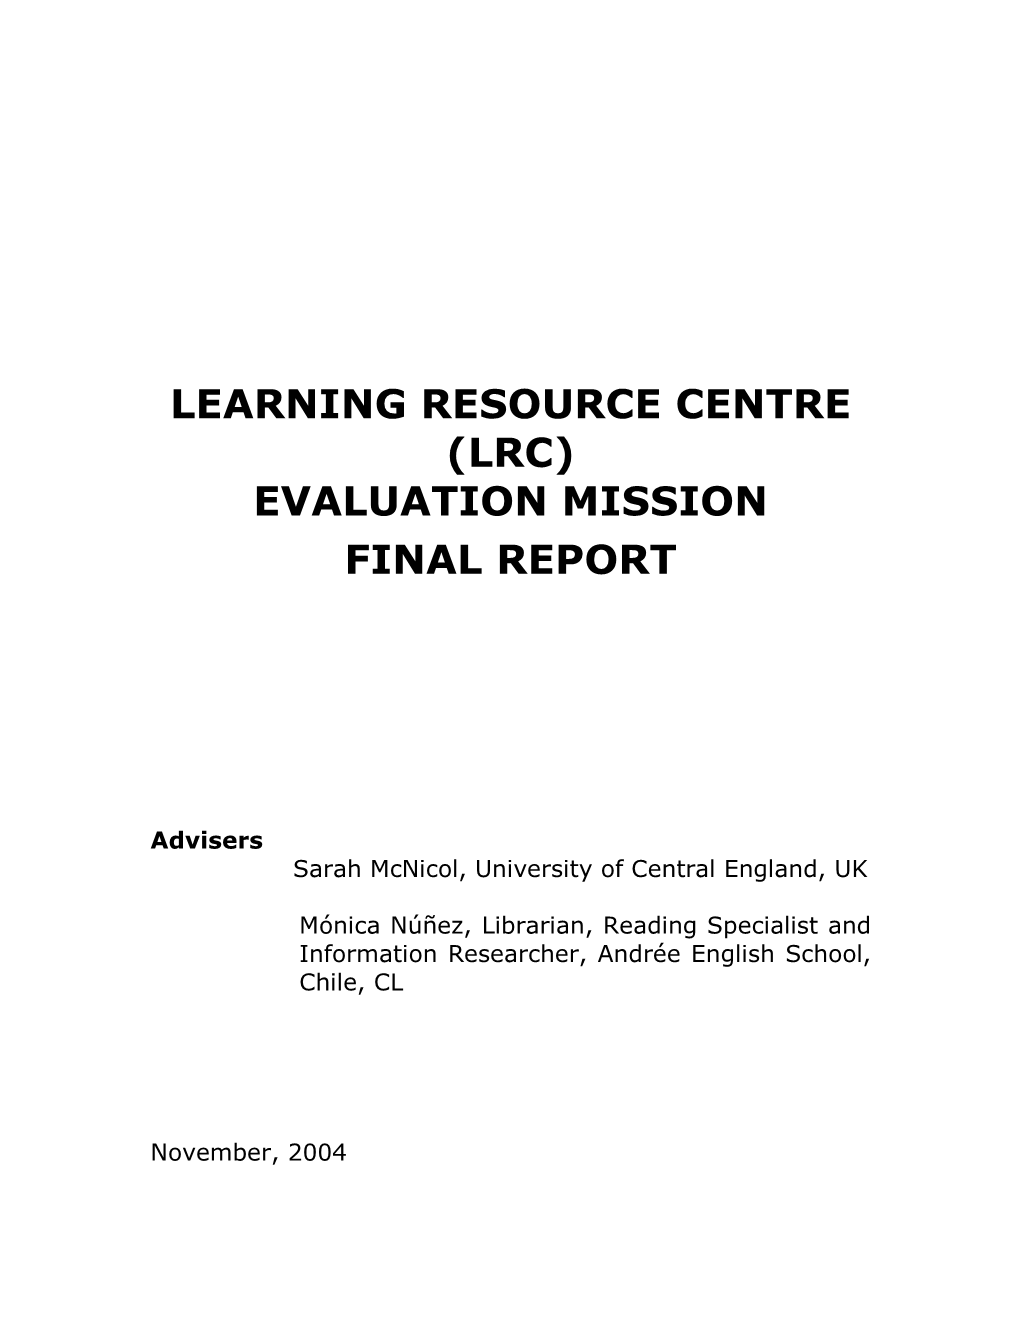 Learning Resource Centre (Lrc) Evaluation Mission Final Report